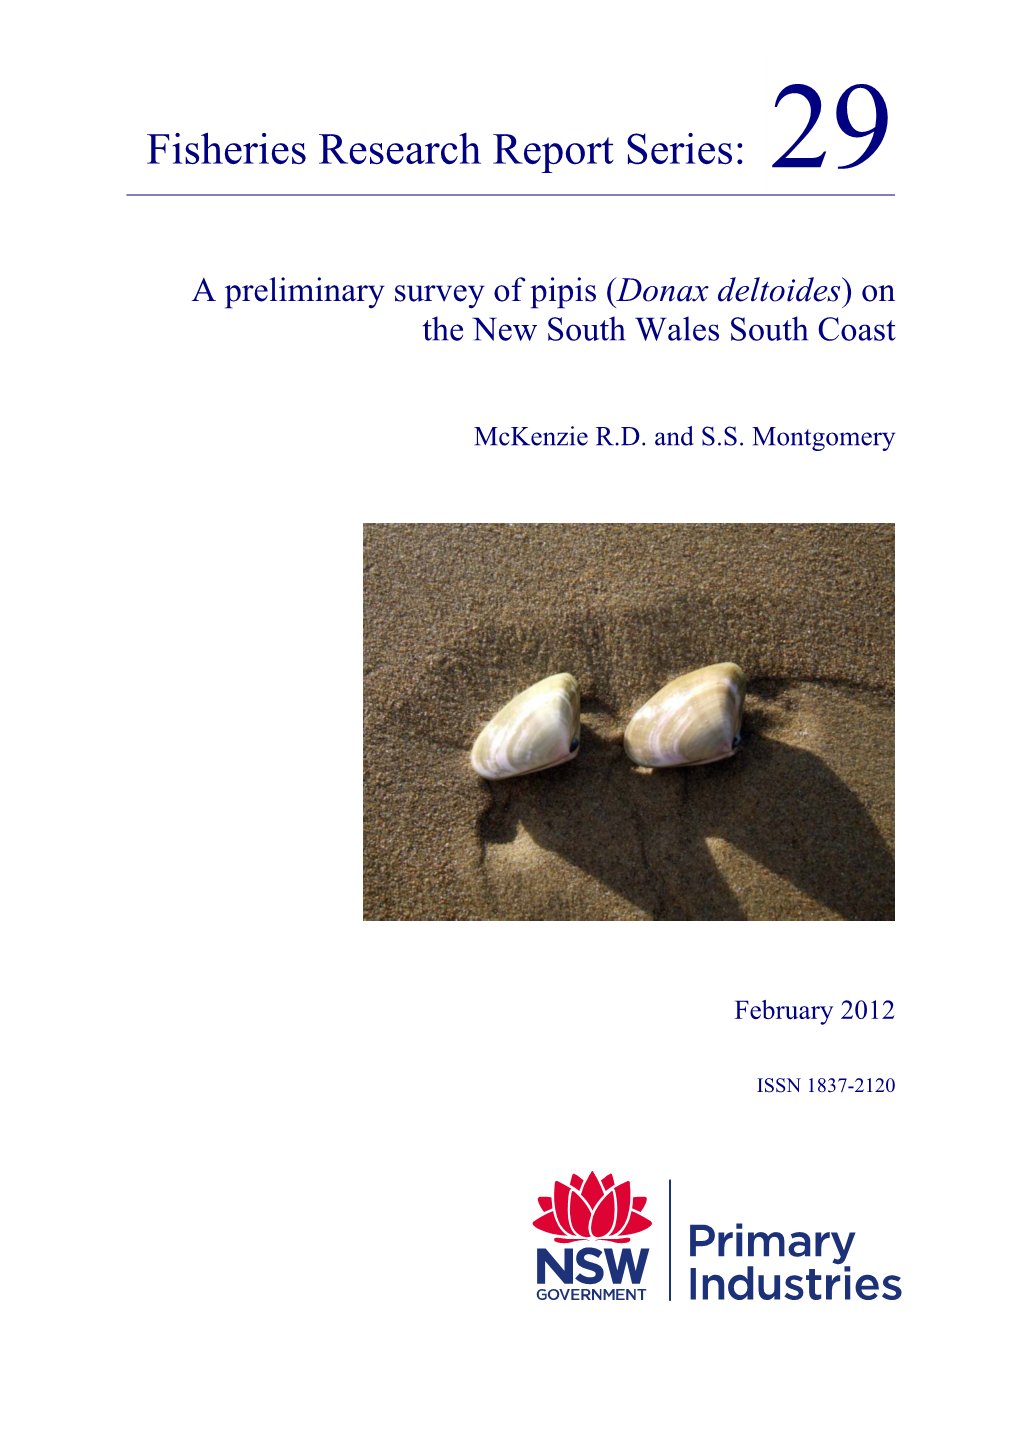 A Preliminary Survey of Pipis (Donax Deltoides) on the New South Wales South Coast